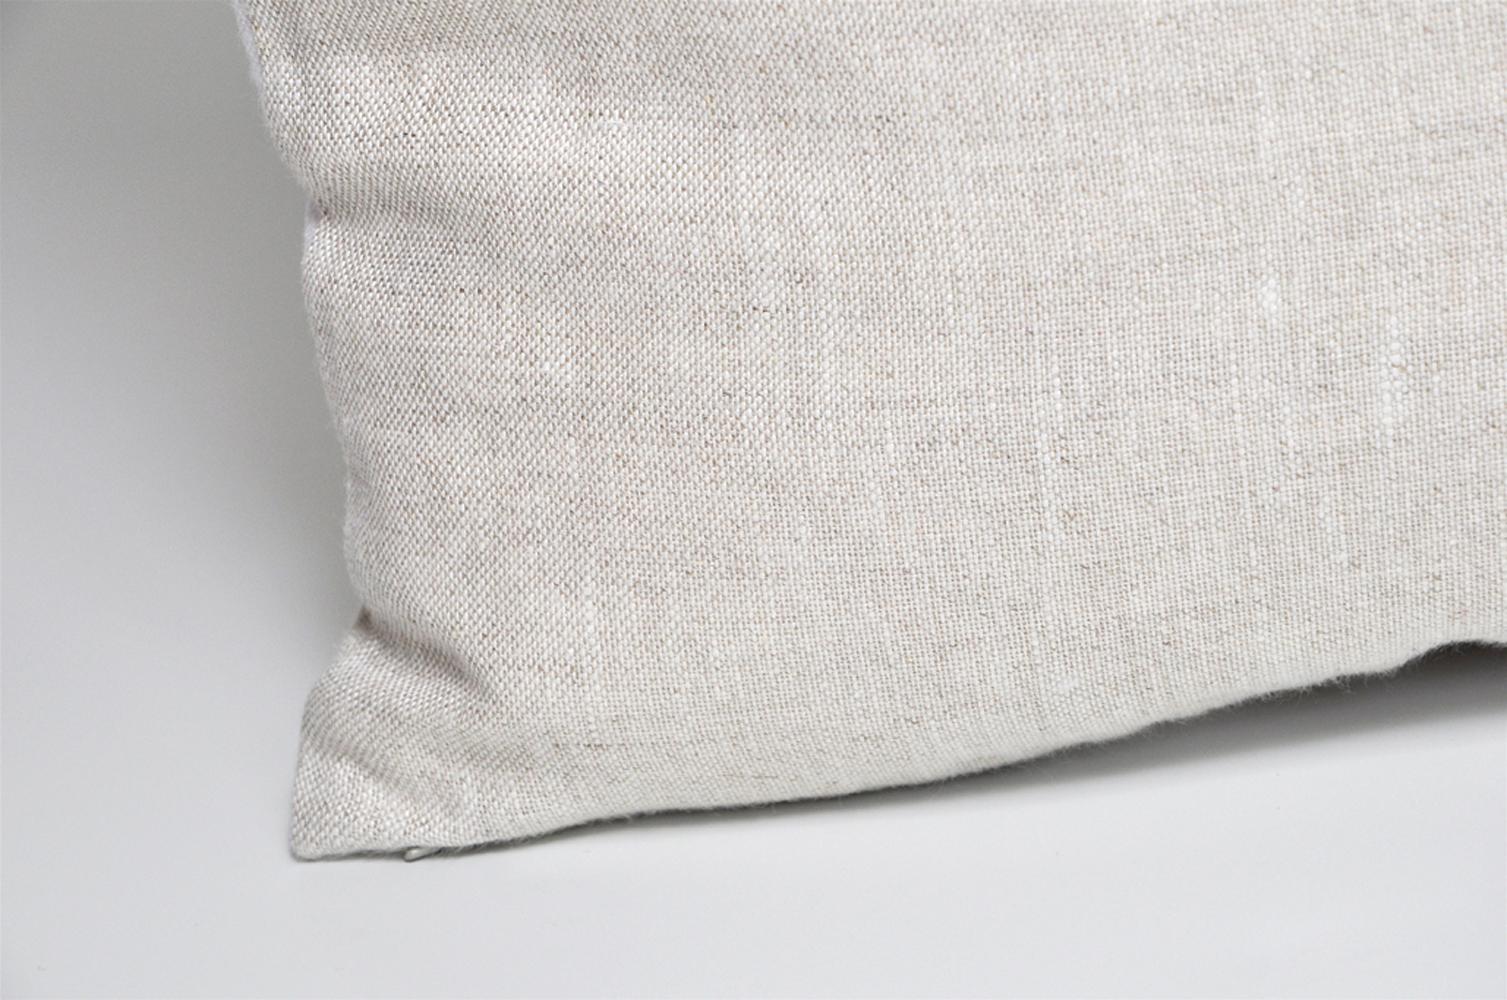 Vintage Nicole Miller silk fabric pillow with Irish Linen cushion

This cushion is a one-of-a-kind and part of a sustainability project. It has been created from a repurposed, up-cycled, recycled fabric, used with the intentions on promoting a